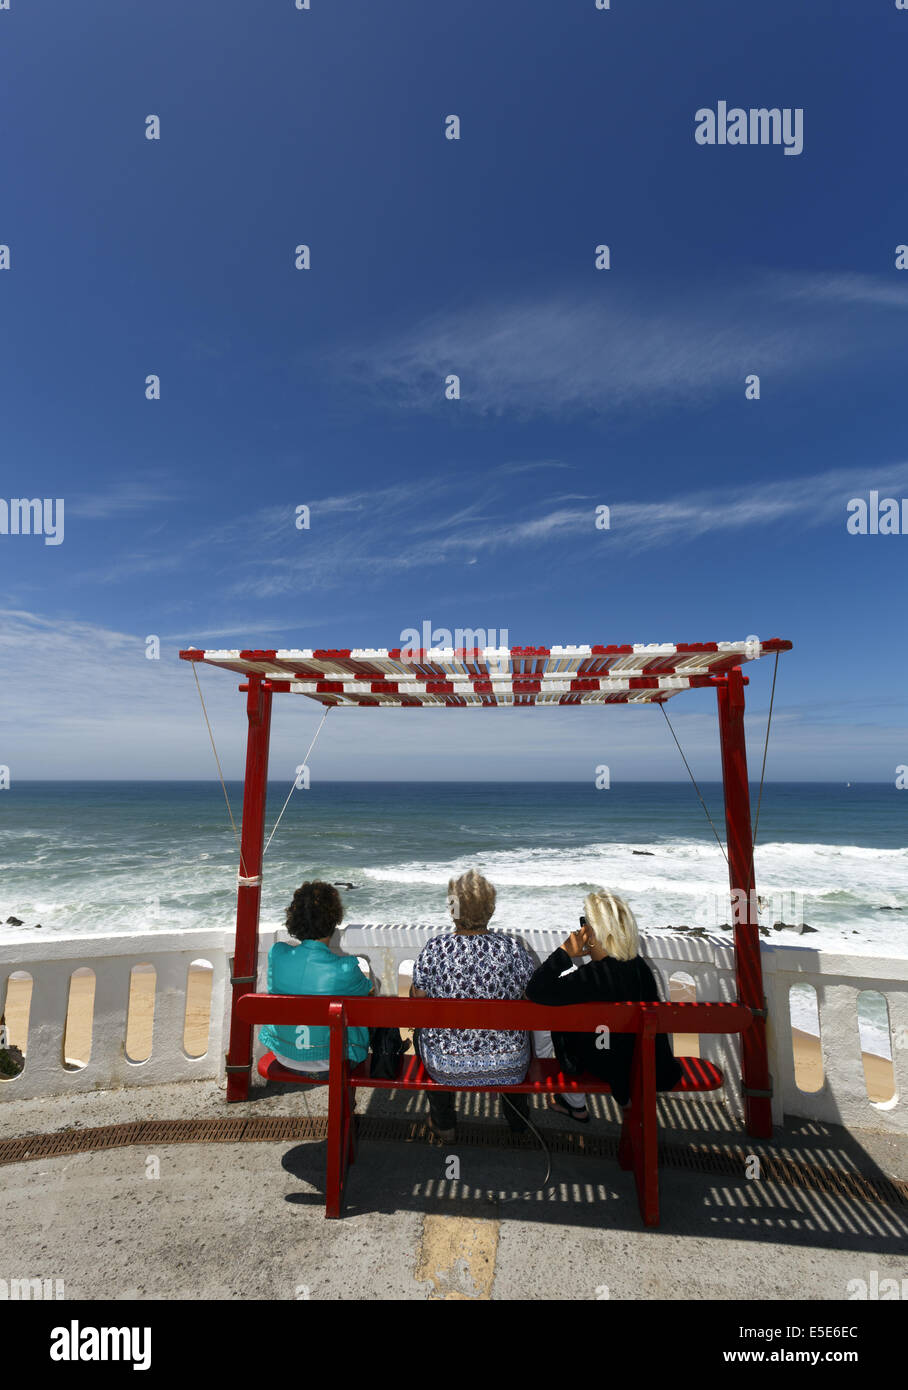 Three females sitting on a shaded bench looking out to sea at Silverira, Portugal Stock Photo